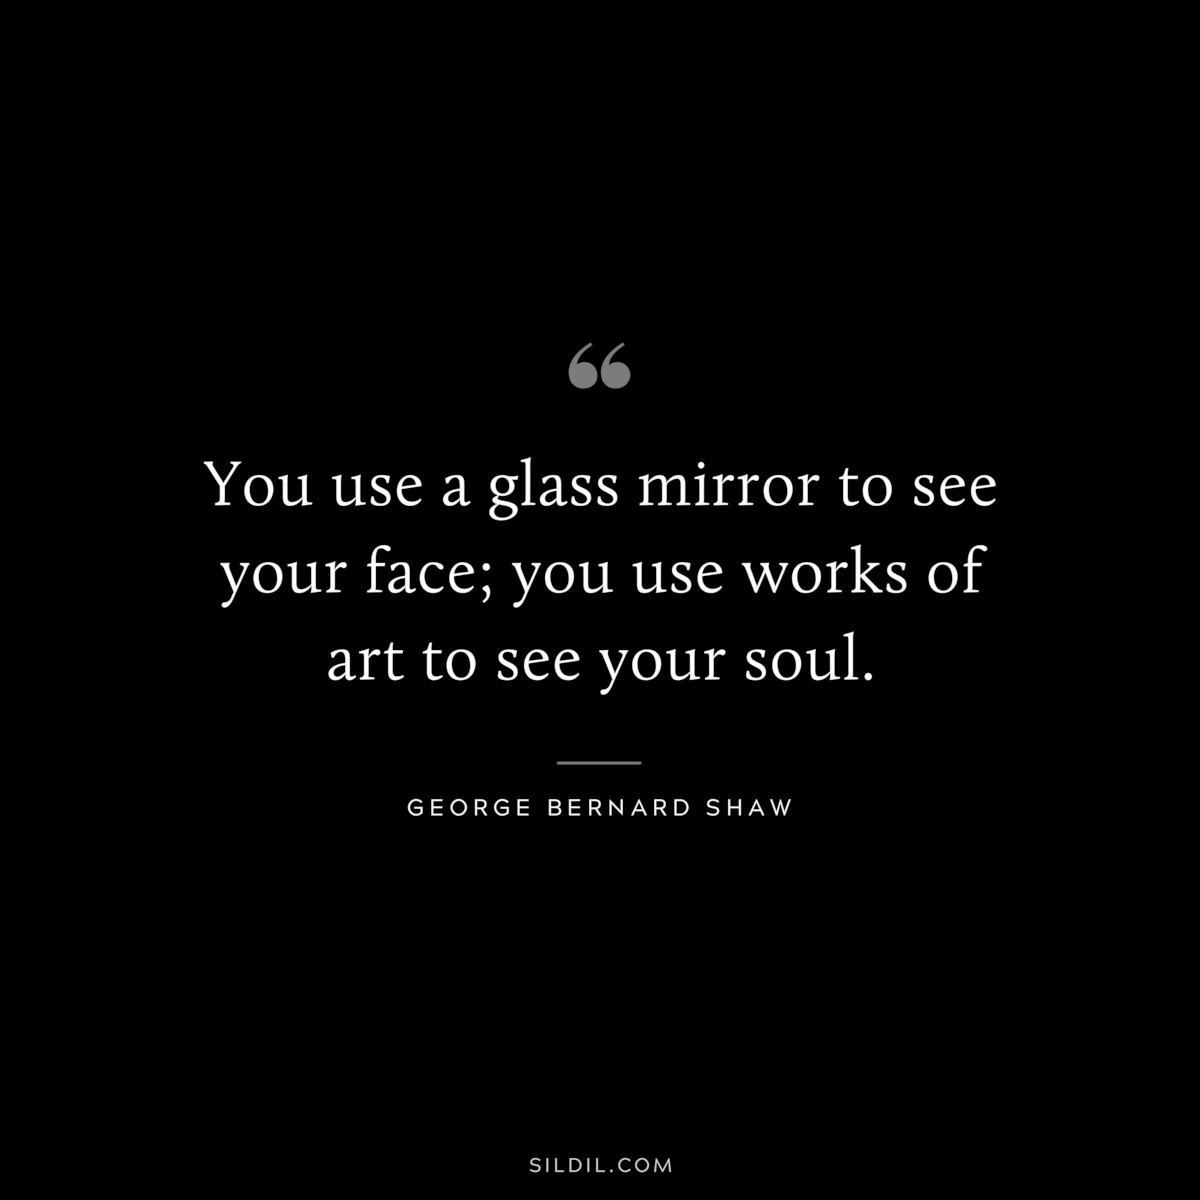 You use a glass mirror to see your face; you use works of art to see your soul. ― George Bernard Shaw